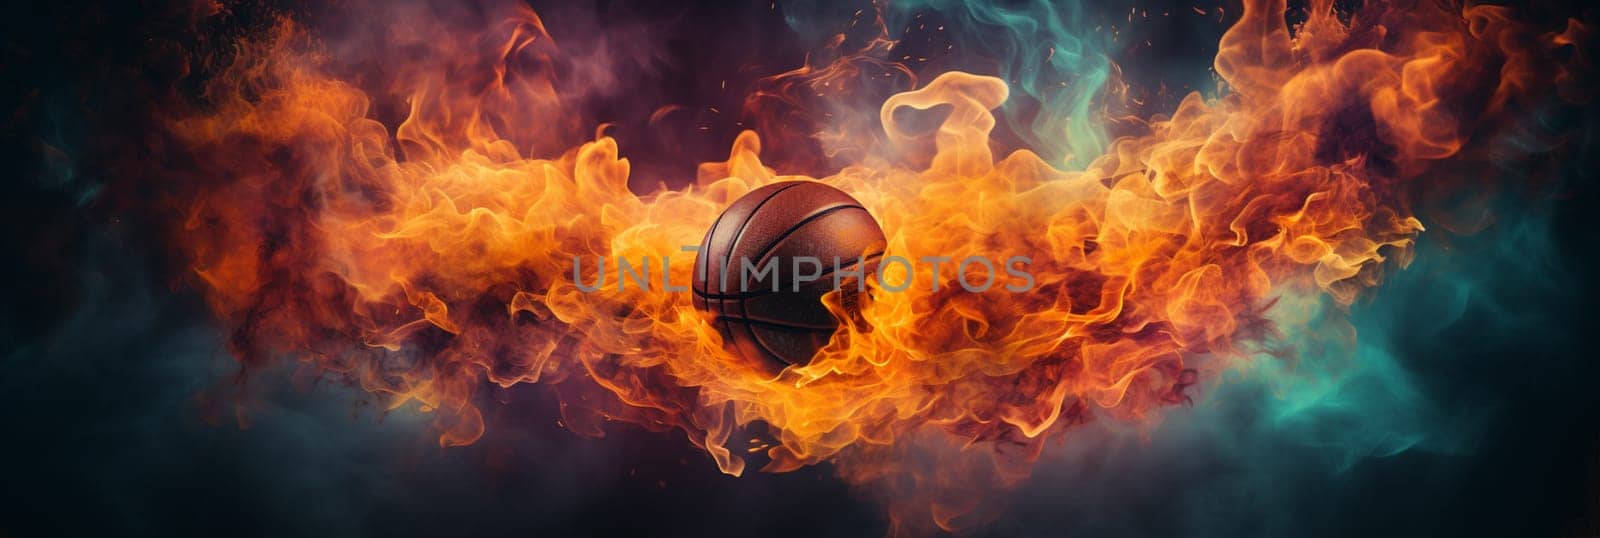 basketball on fire in basketball court stadium with lights in the field shining by Andelov13